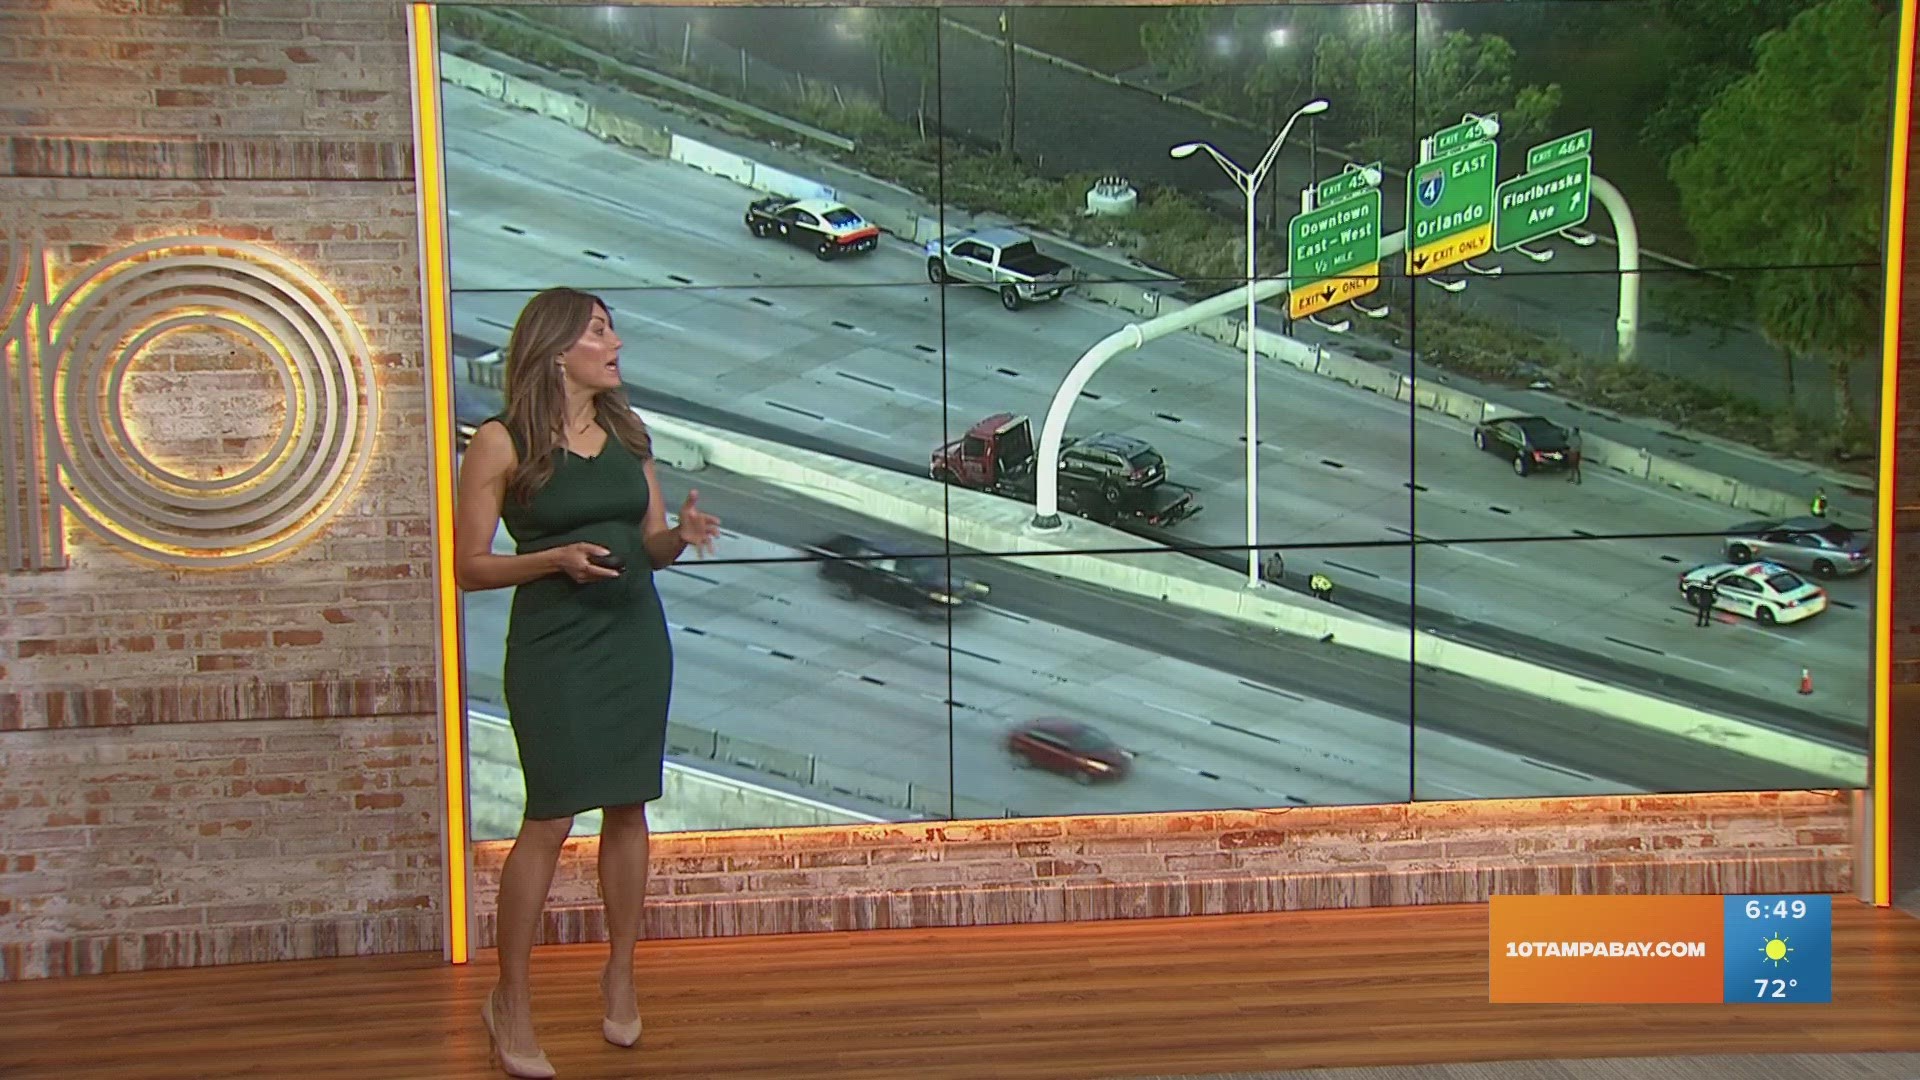 Commuters are facing long delays for miles along the major highway just before the I-4 connector and downtown Tampa exits.